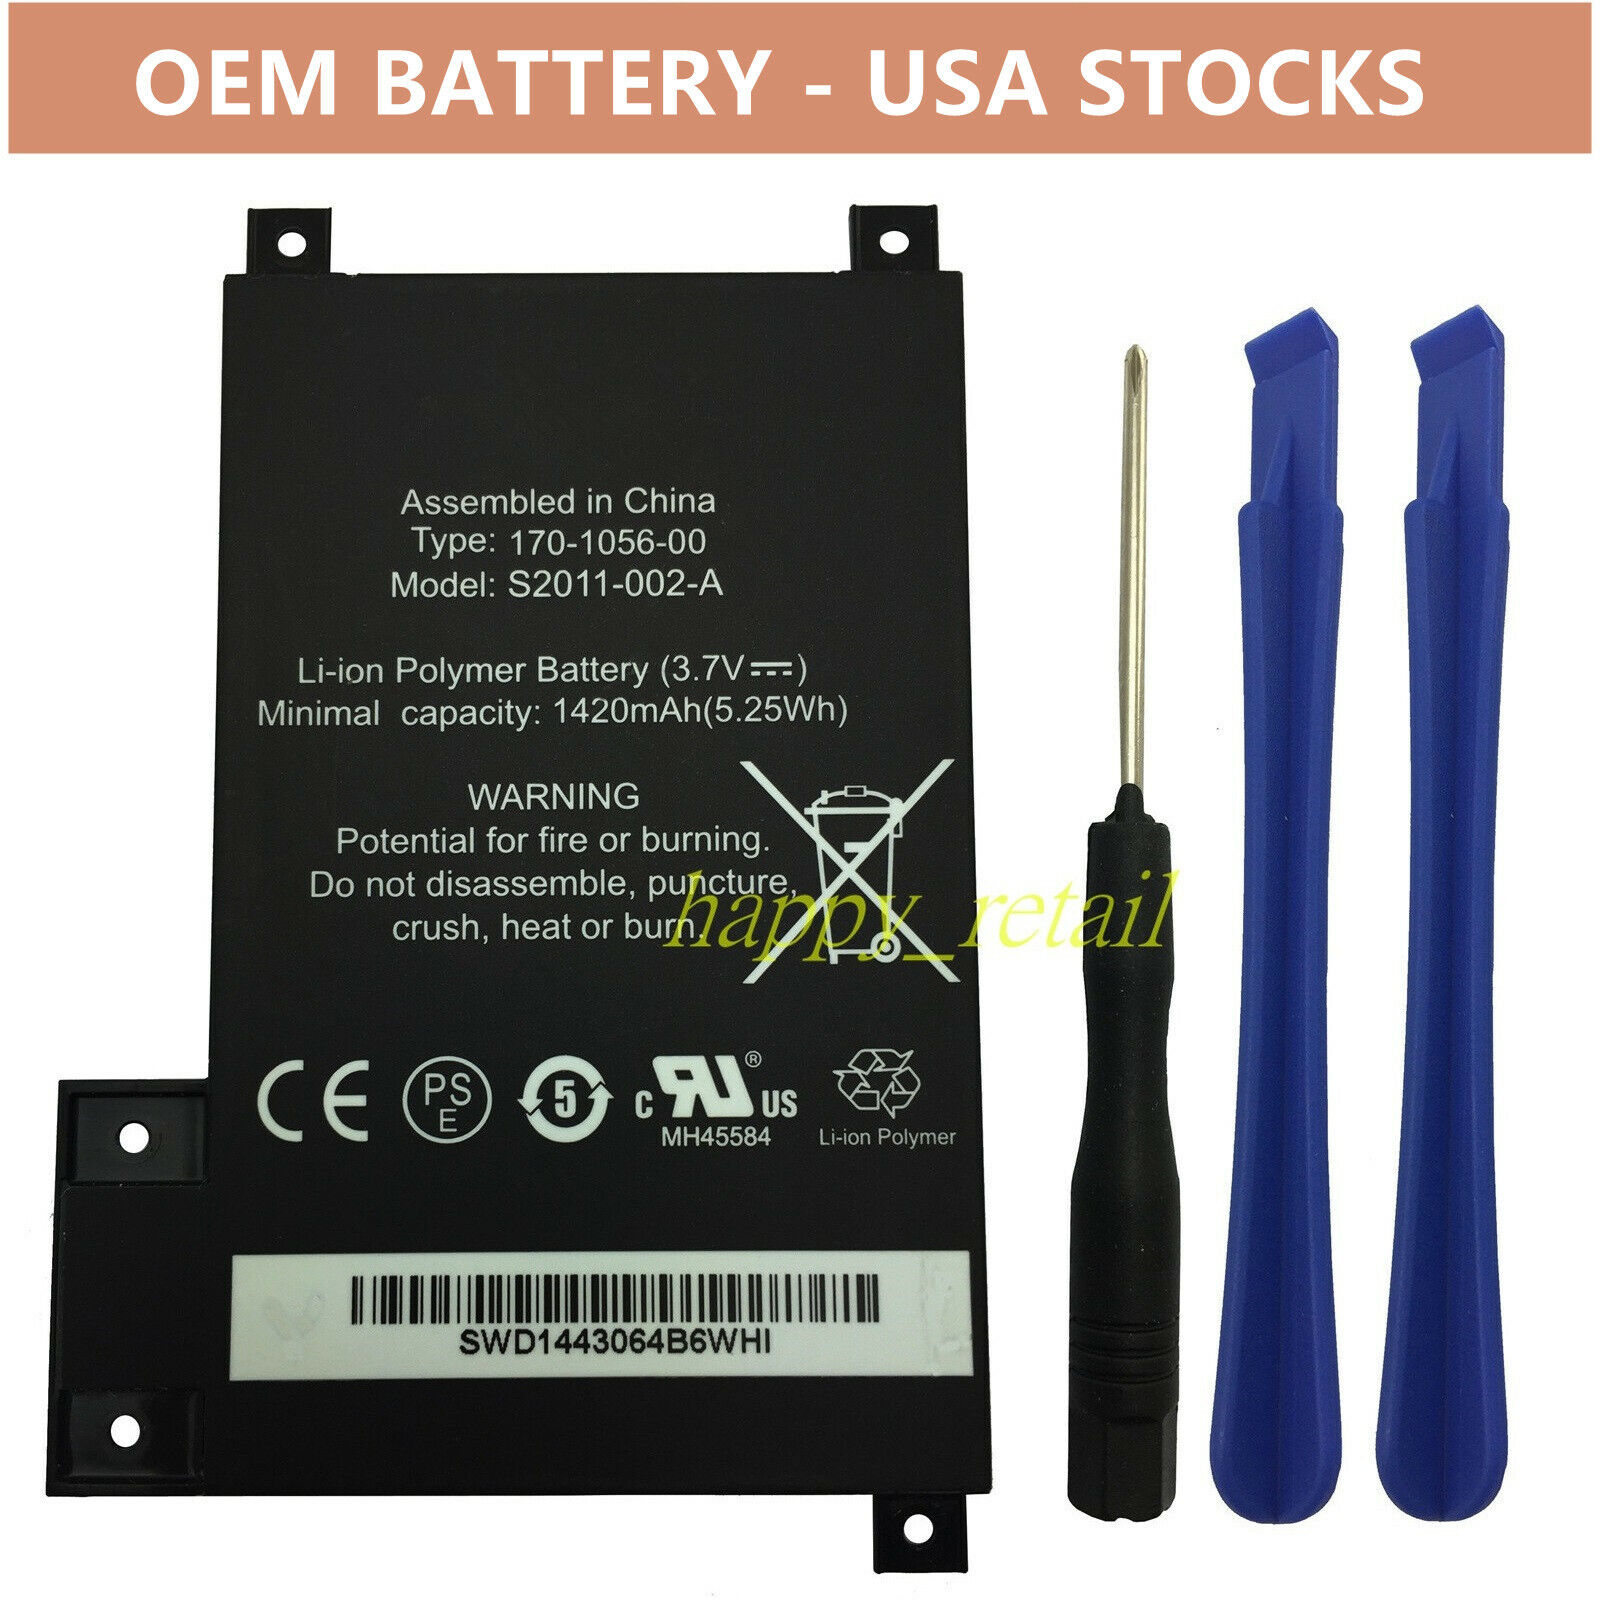 OEM New Battery For Amazon Kindle Touch D01200 MC-354775 170-1056-00 S2011-002-A